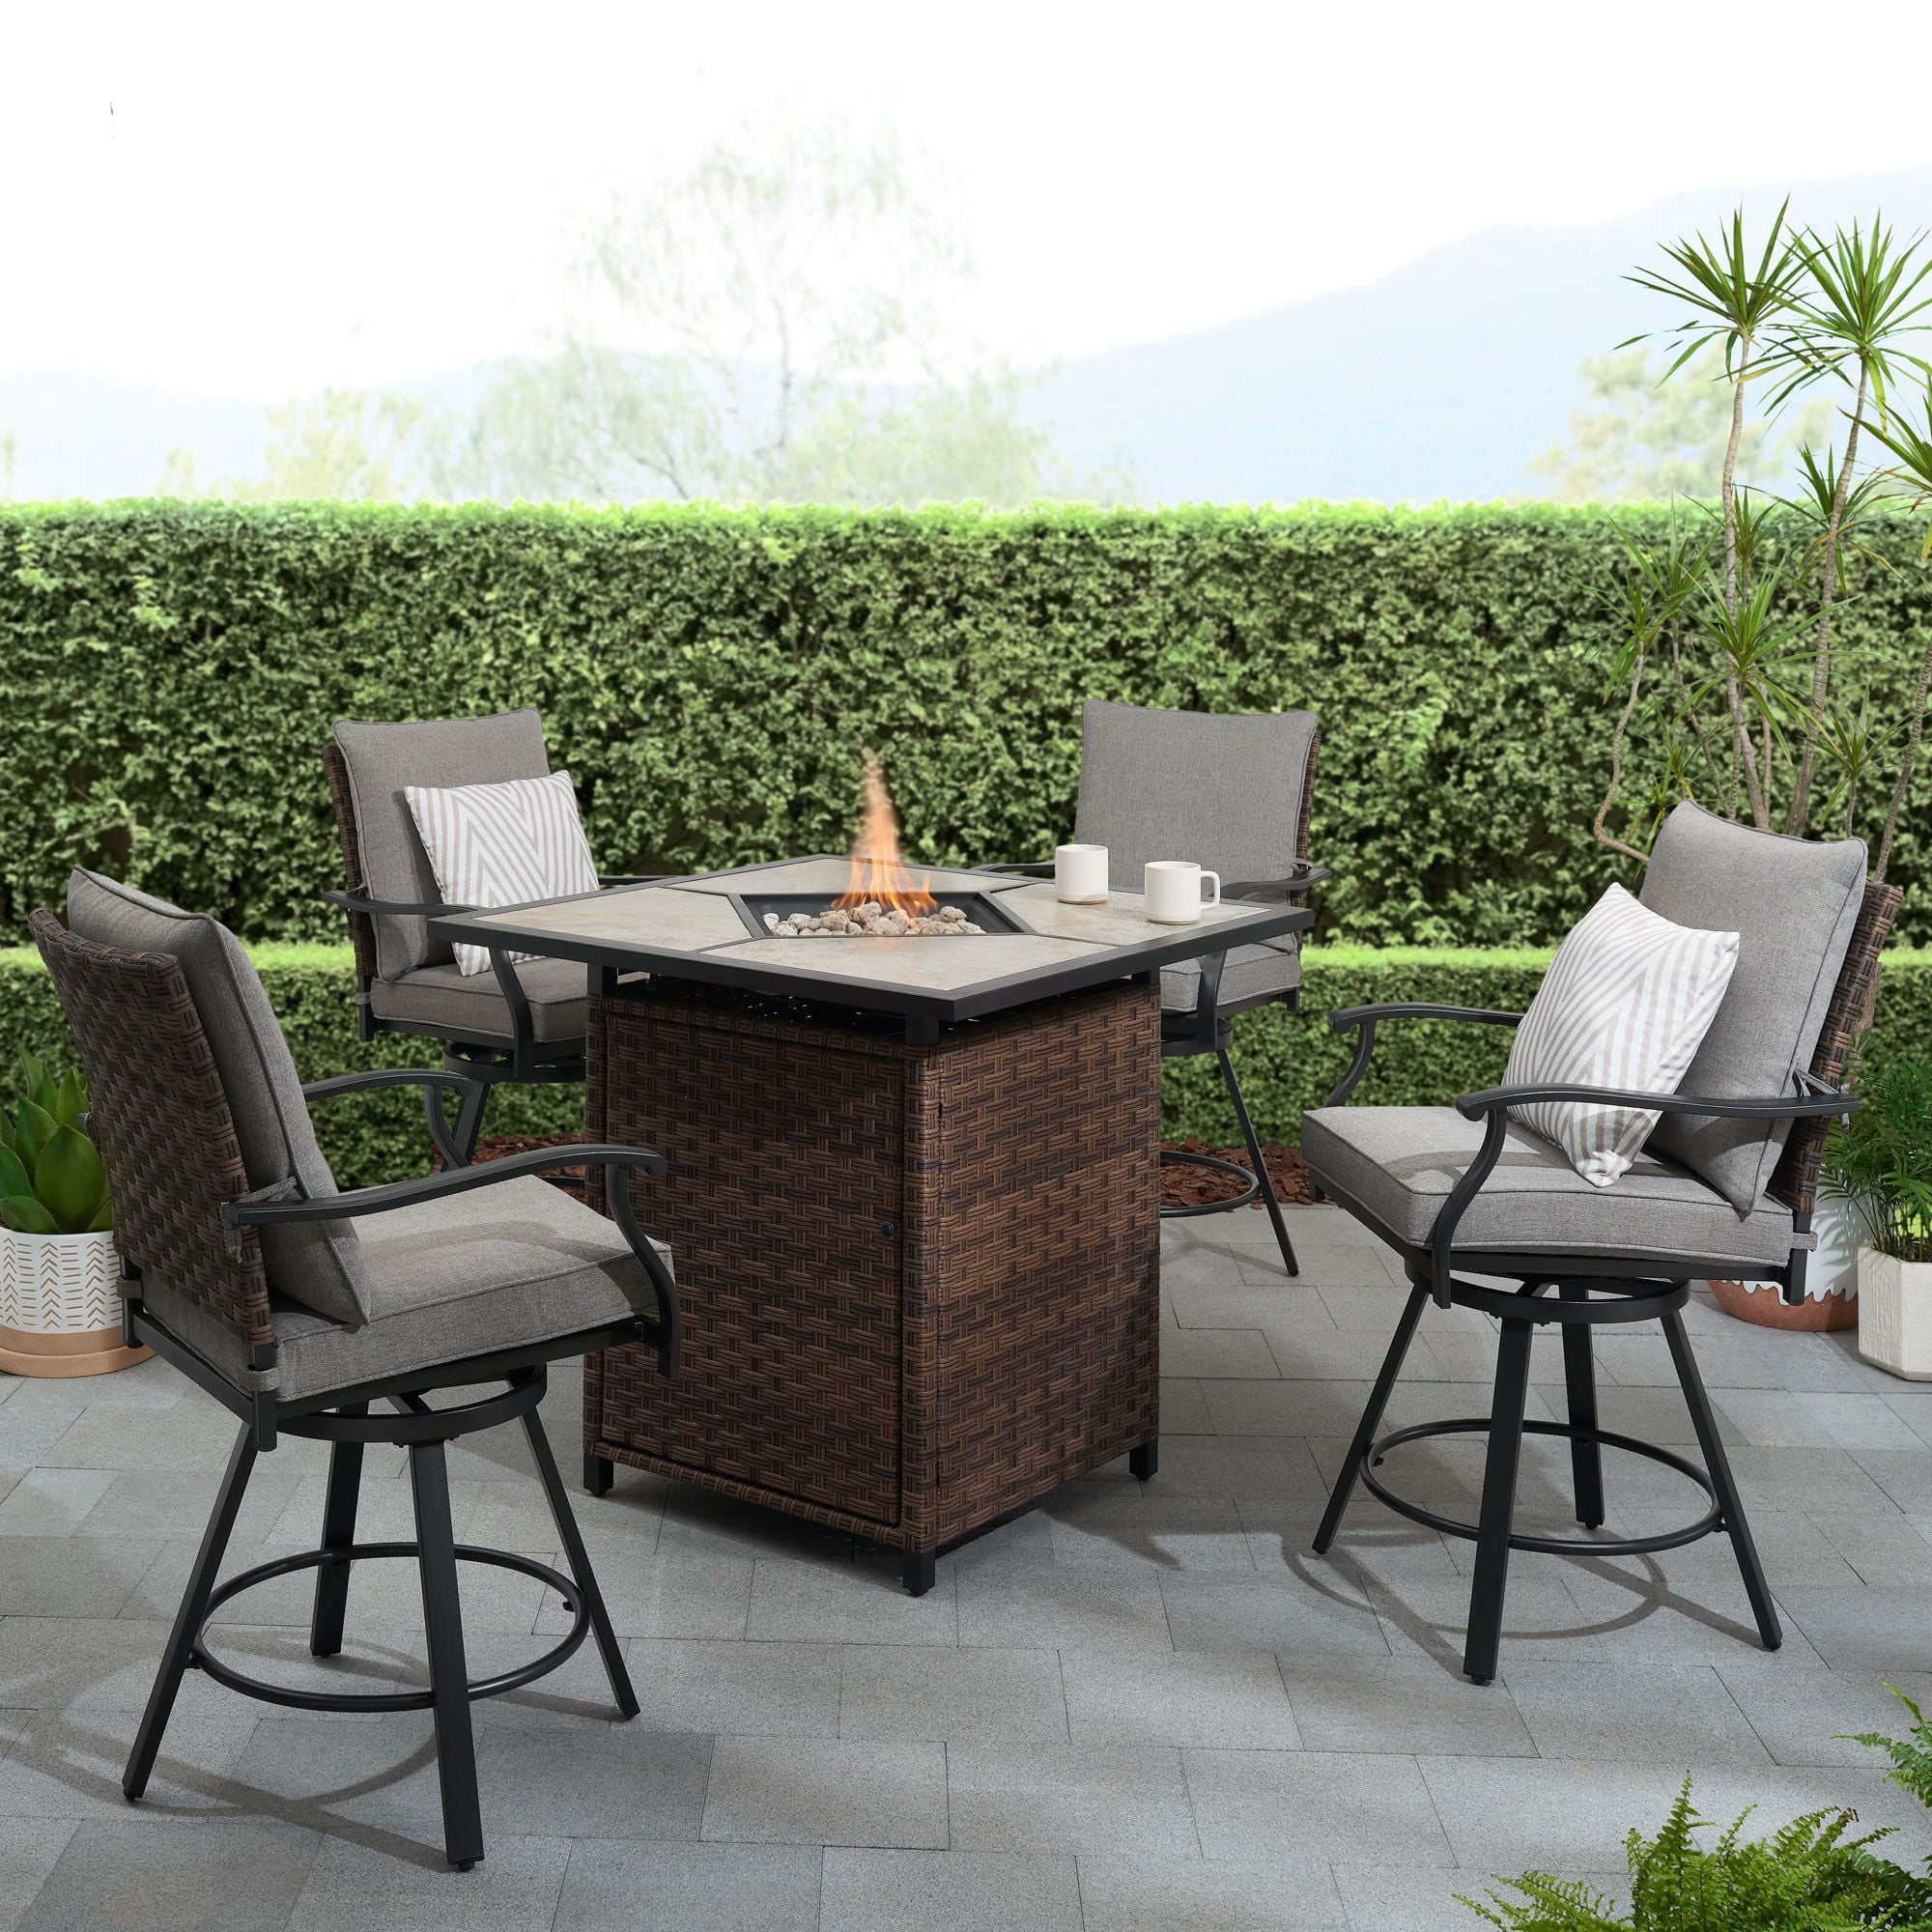 Better Homes & Gardens Elmdale 5 Piece High Swivel Patio Dining Set with Firepit table